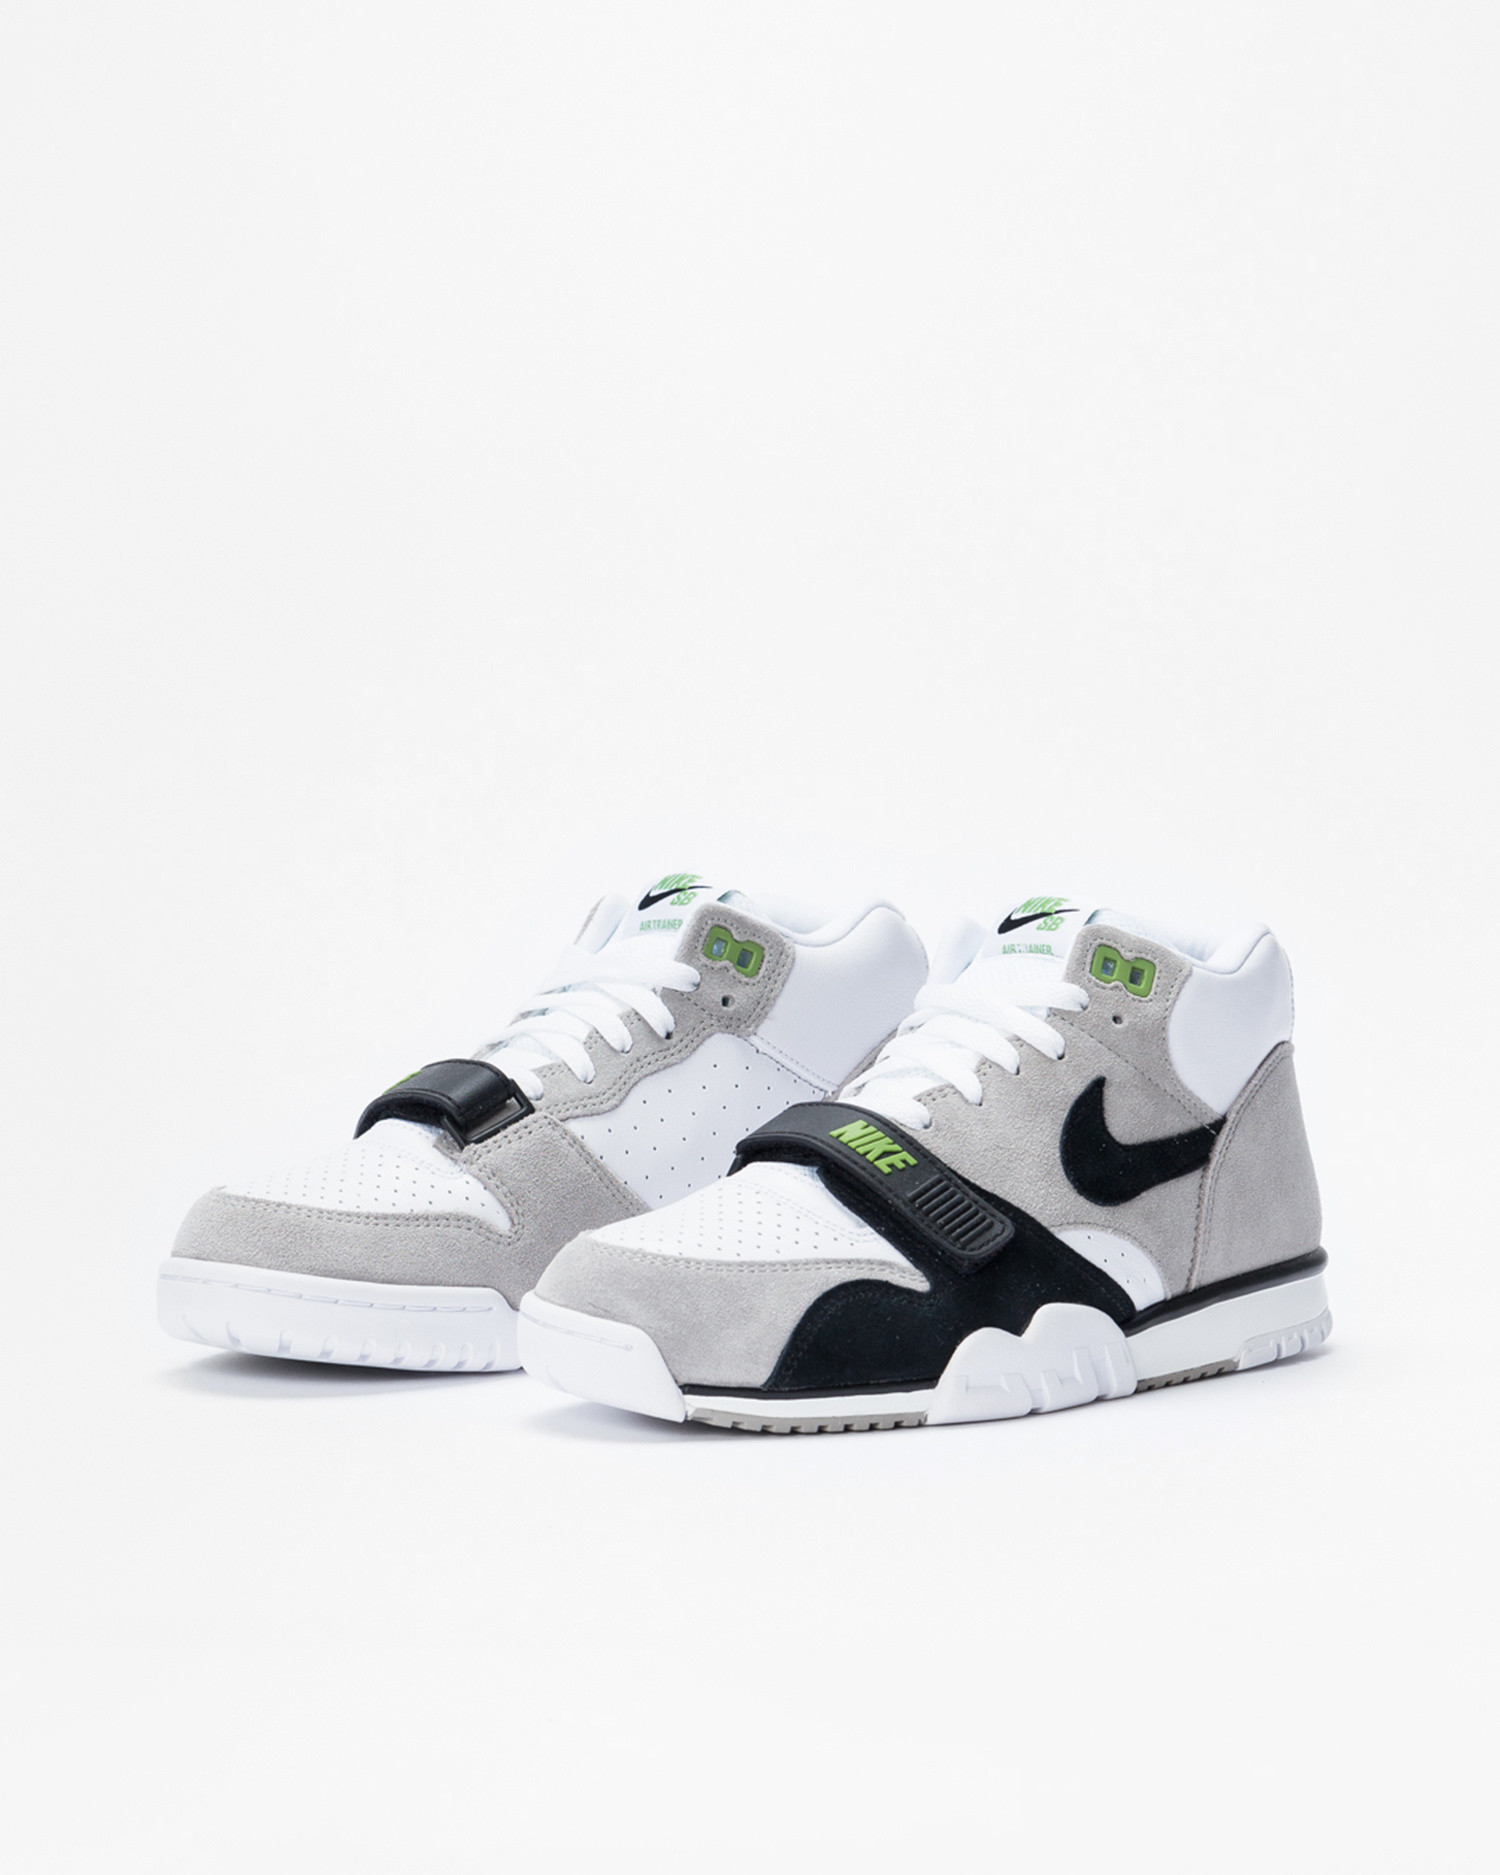 nike air trainer 1 iso